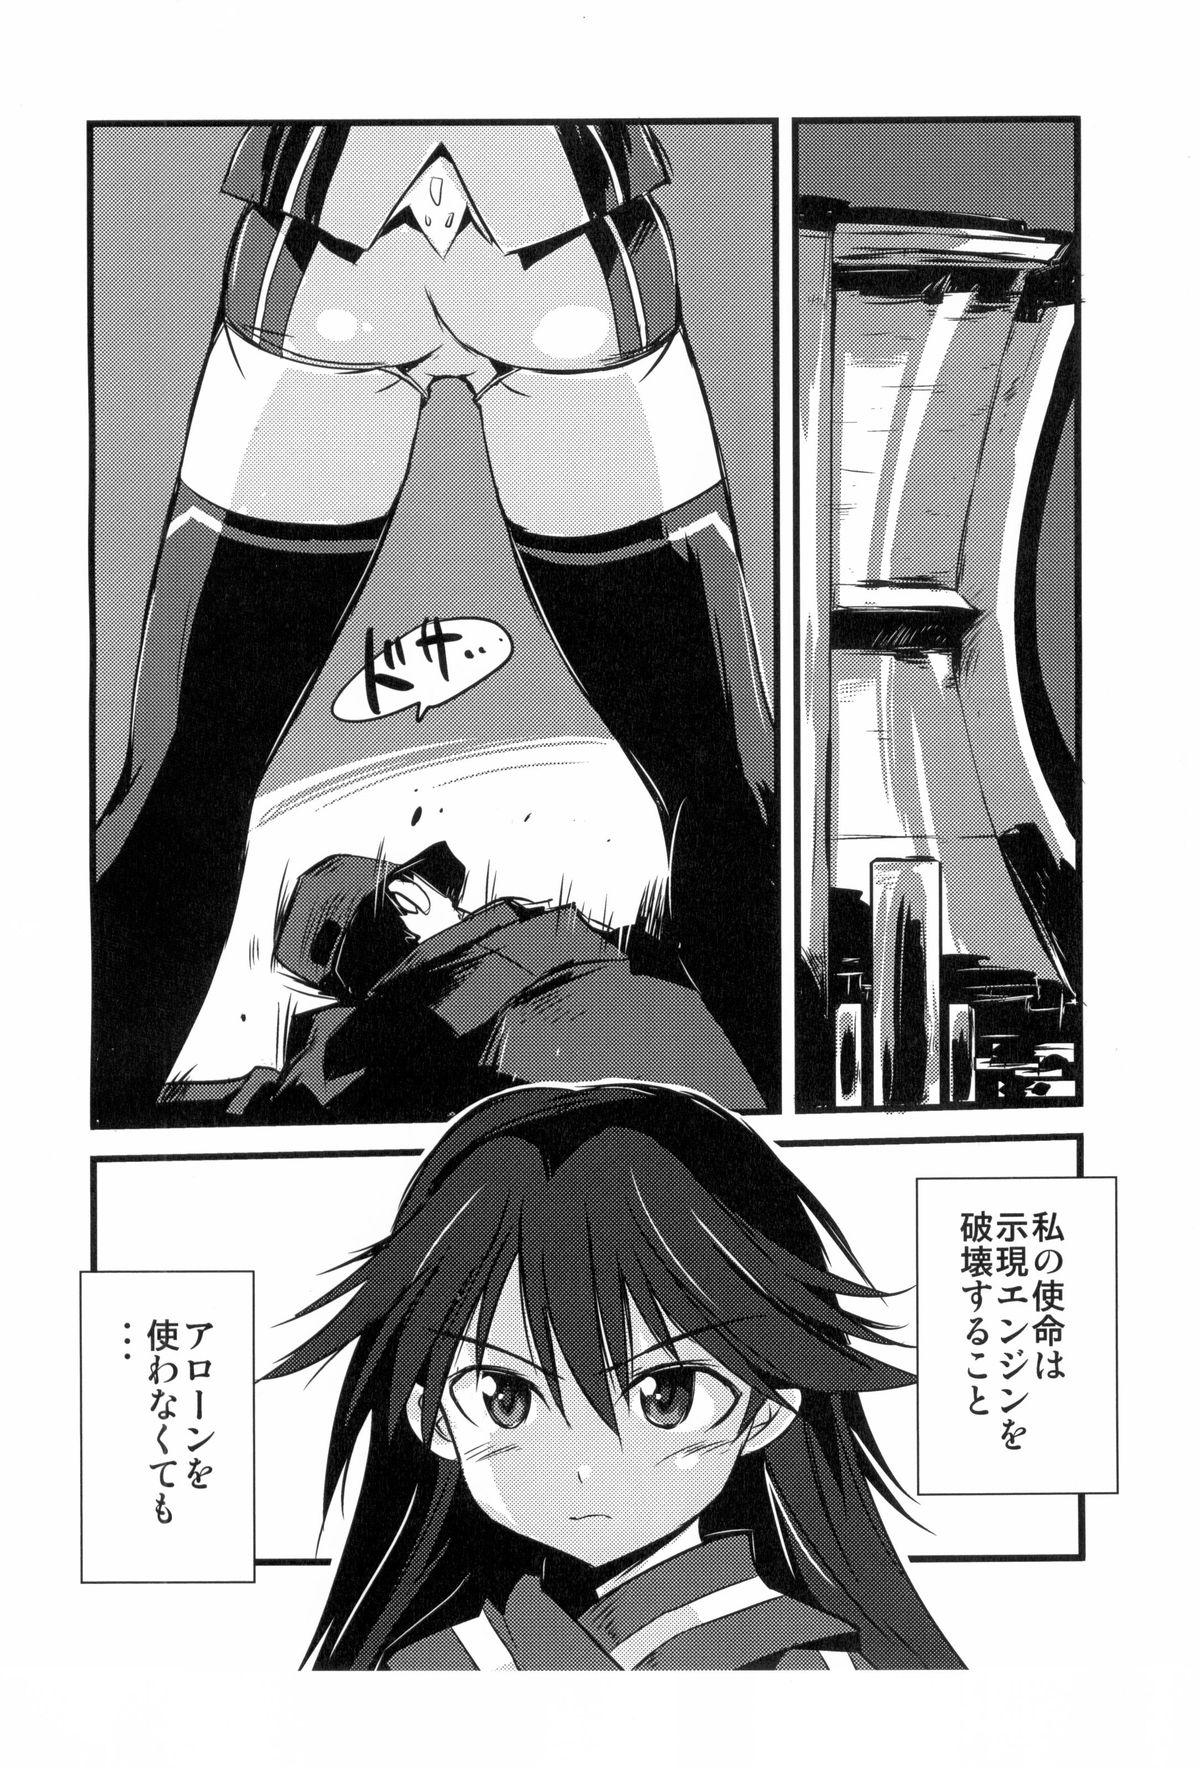 Gay Solo operation 0 - Vividred operation Fuck - Page 4